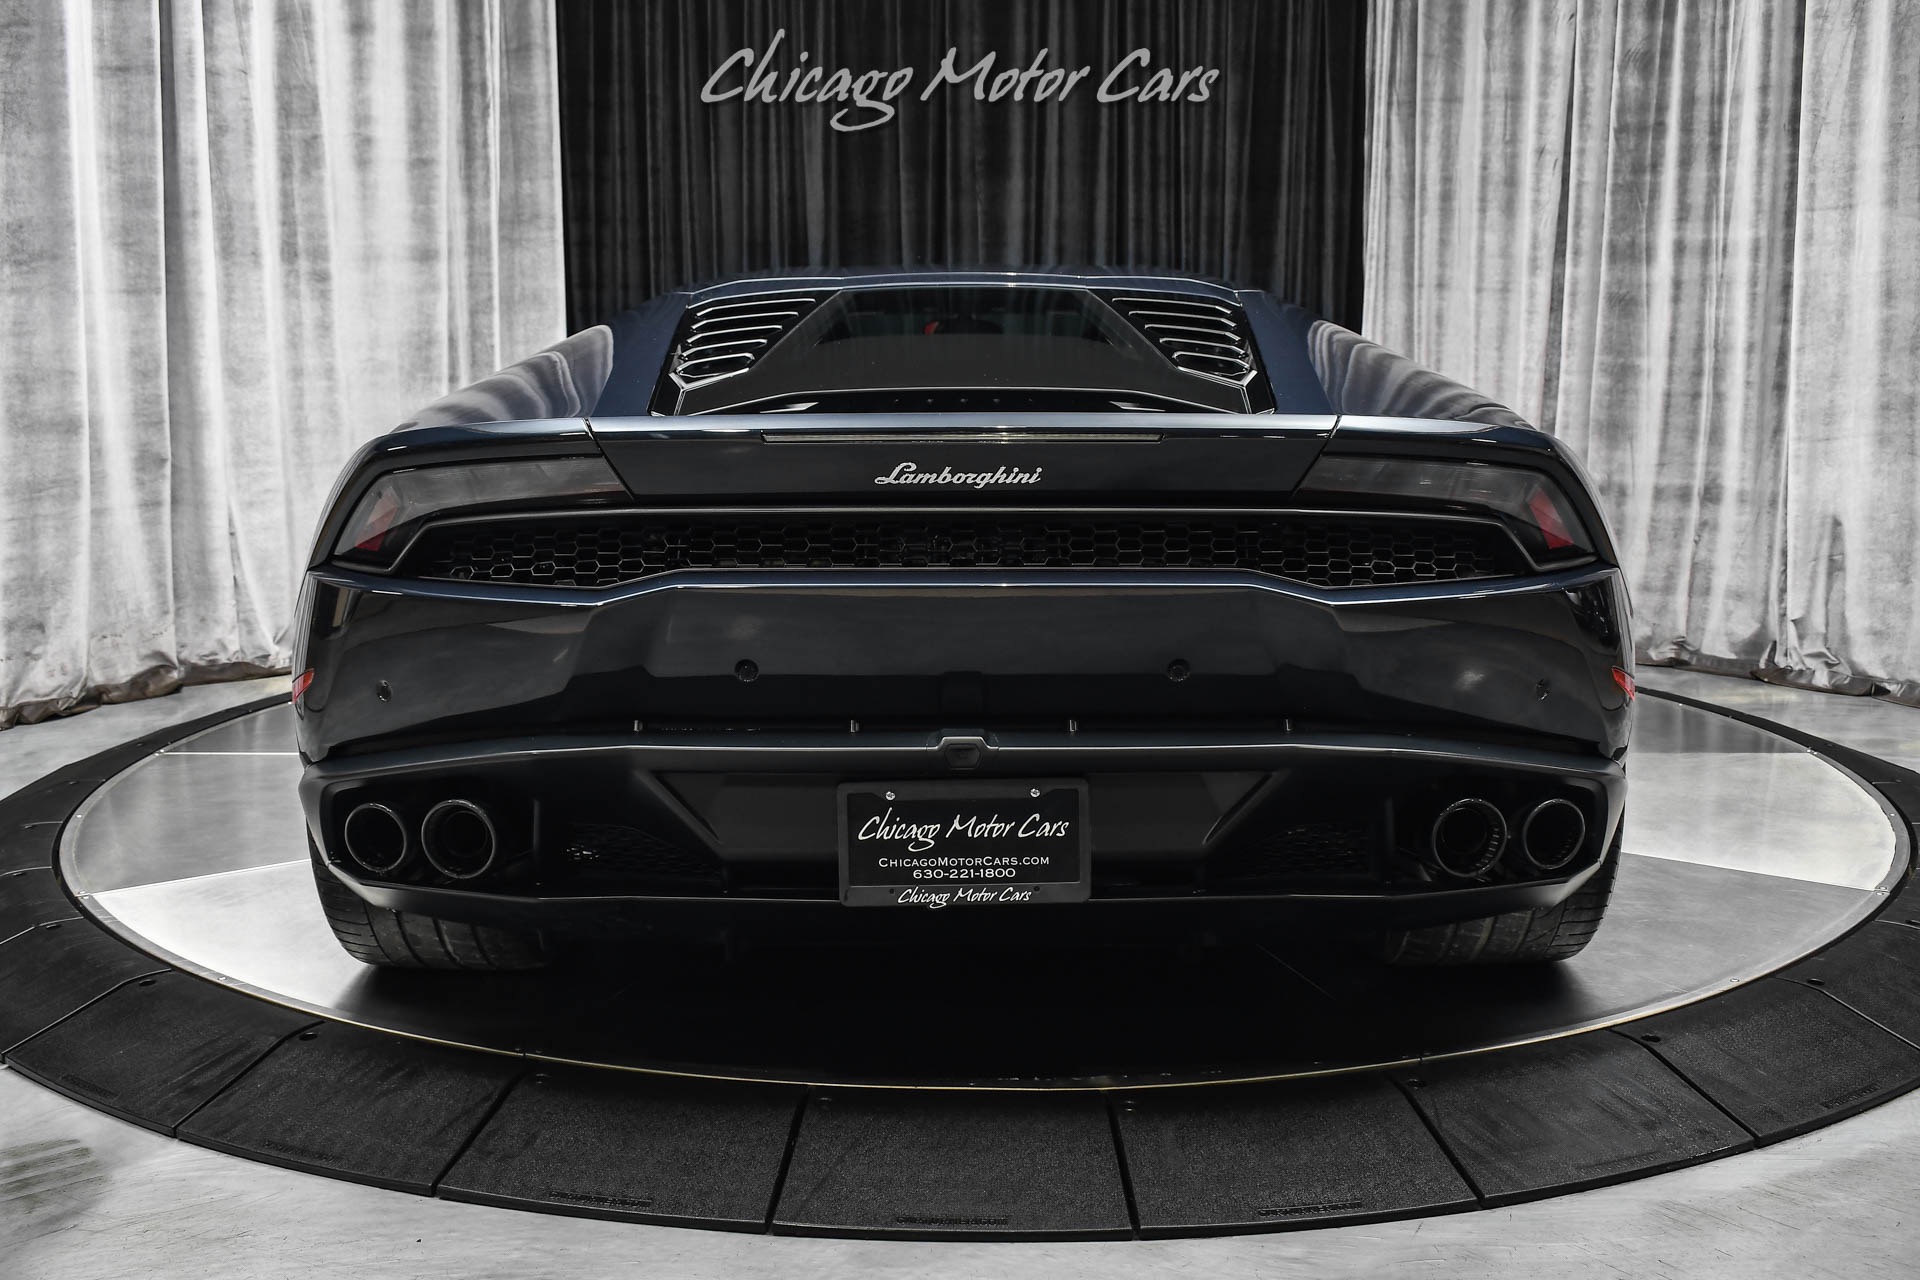 Used-2015-Lamborghini-Huracan-LP610-4-Coupe-34K-IN-OPTIONS-Front-Lift-Full-Elec-Seats-Front-PPF